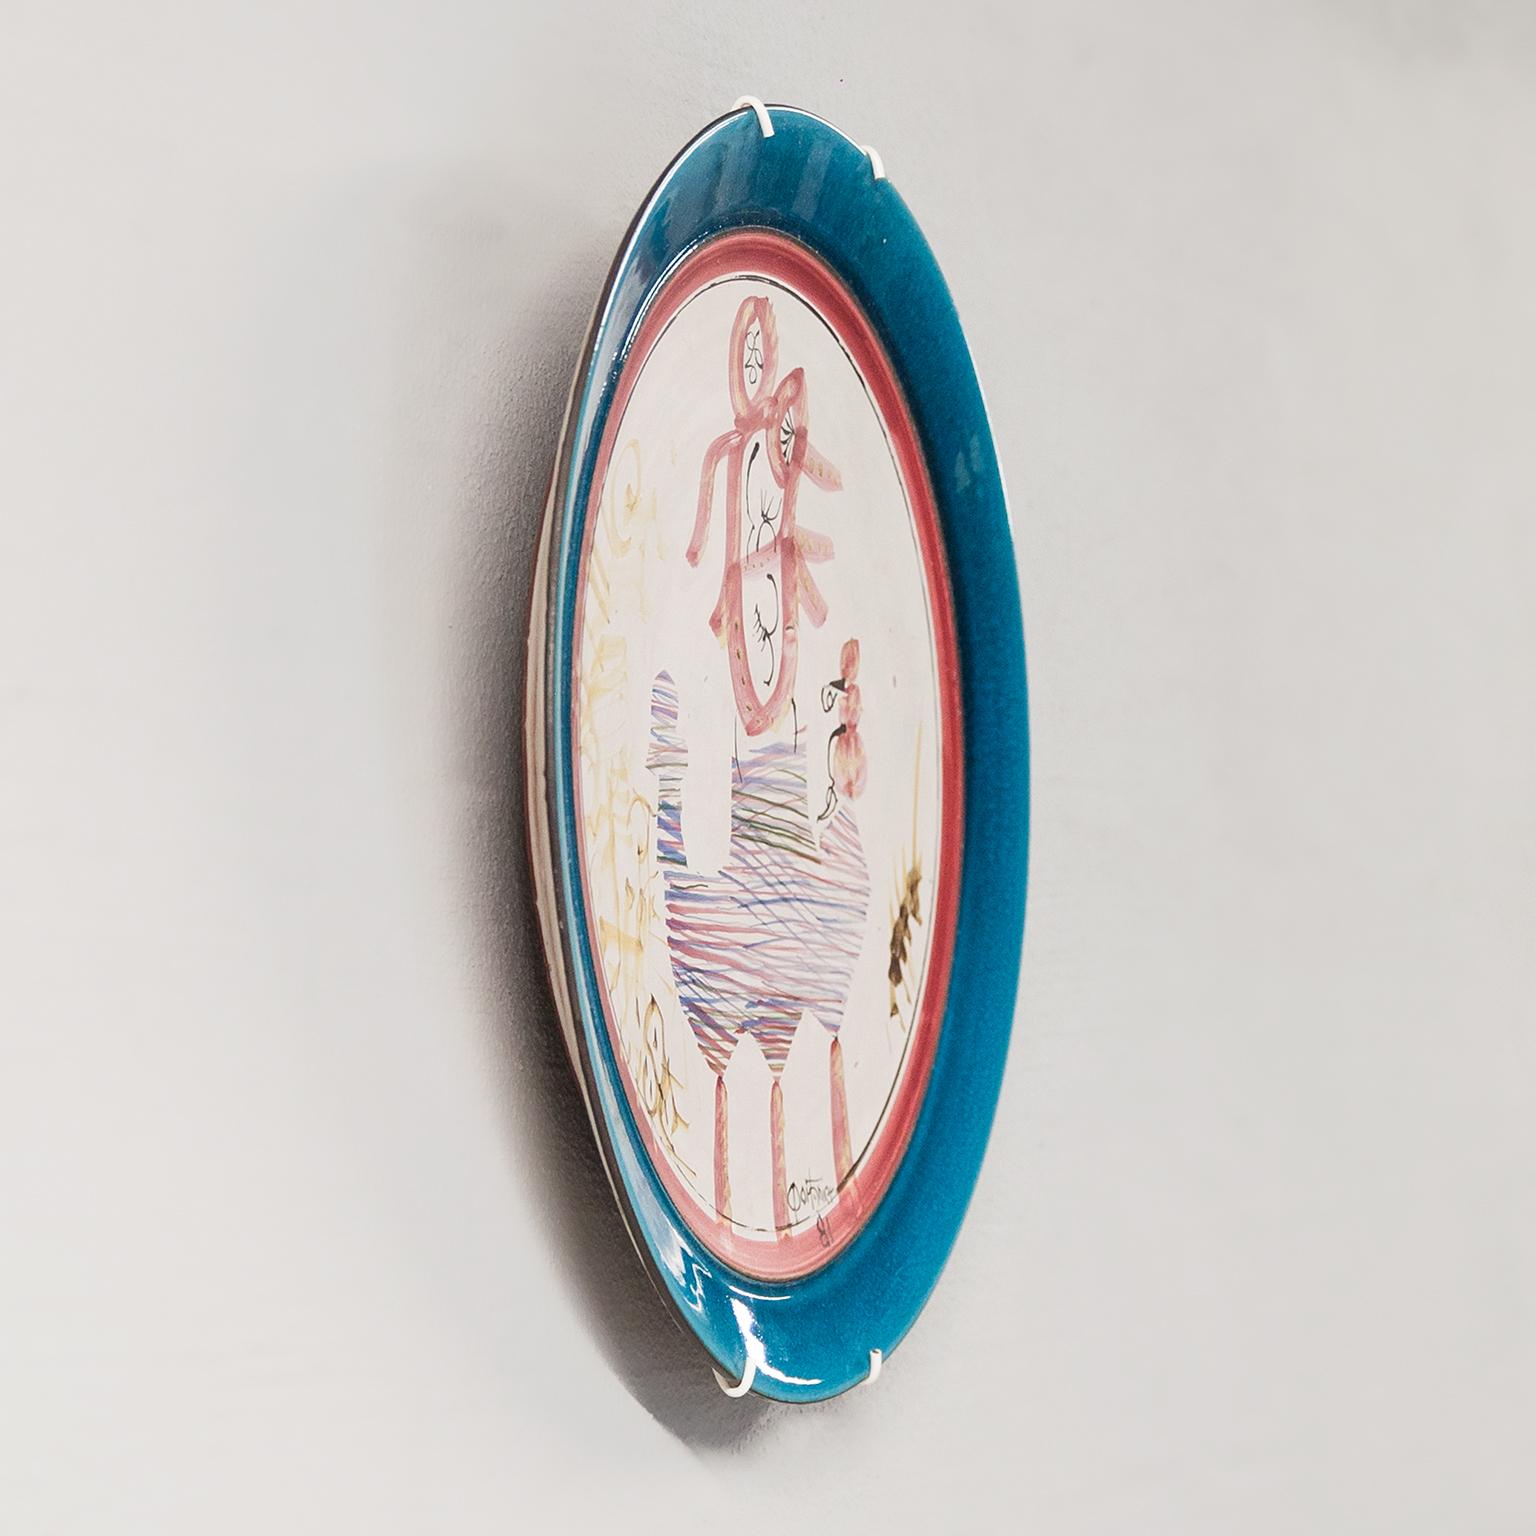 A rare Gilbert PORTANIER born in 1926 ceramic plate / bowl with a design of an abstract polychrome painted inspiration in the middle, bright blue surround and red rim. Unique piece. Monogrammed on with Portanier 1981.